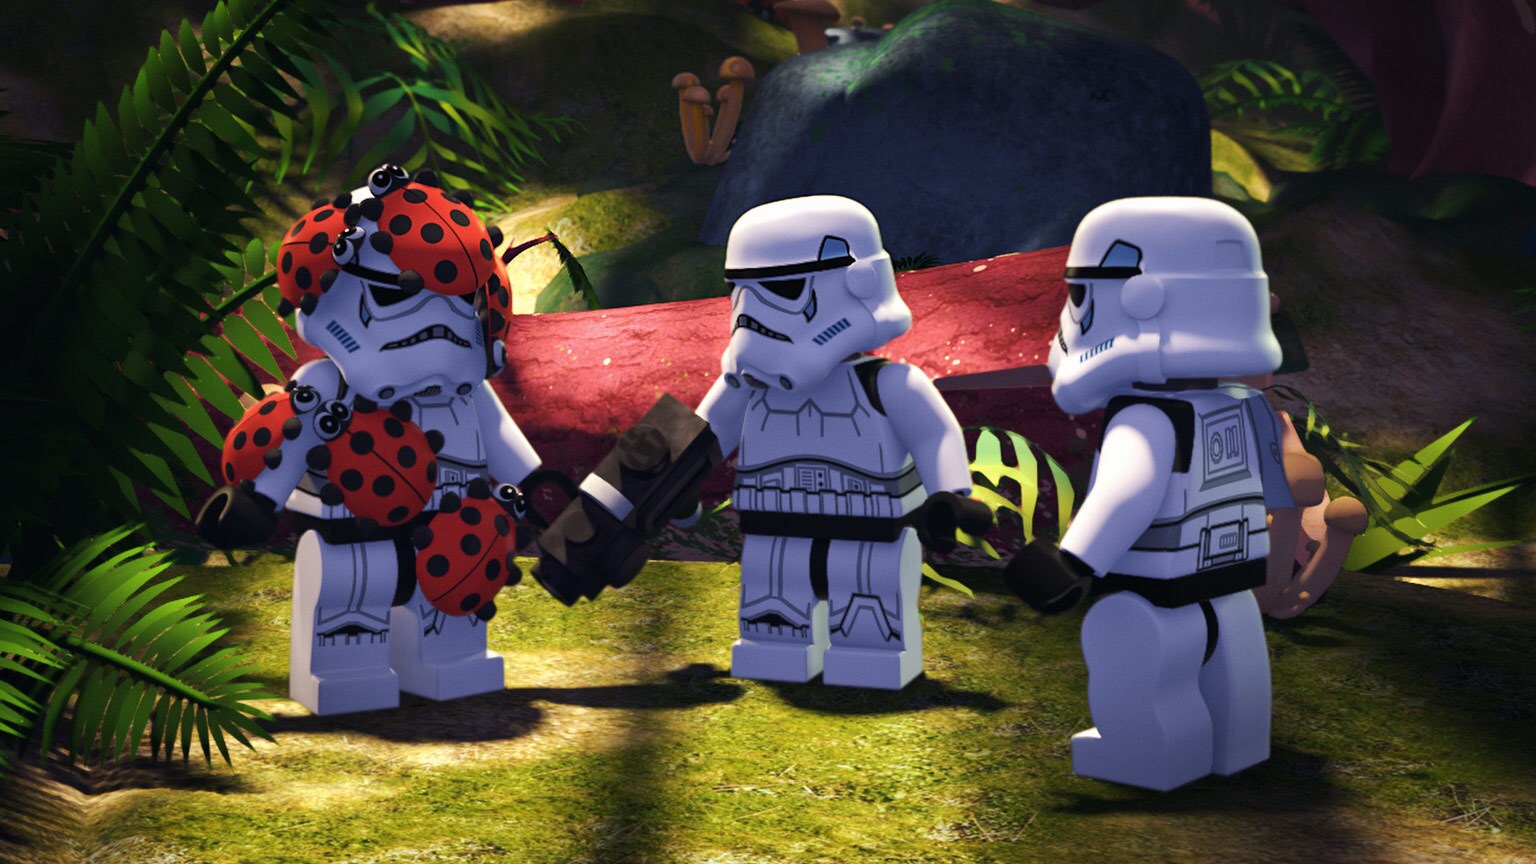 5 Reasons You Need to Watch LEGO Star Wars: The Freemaker Adventures